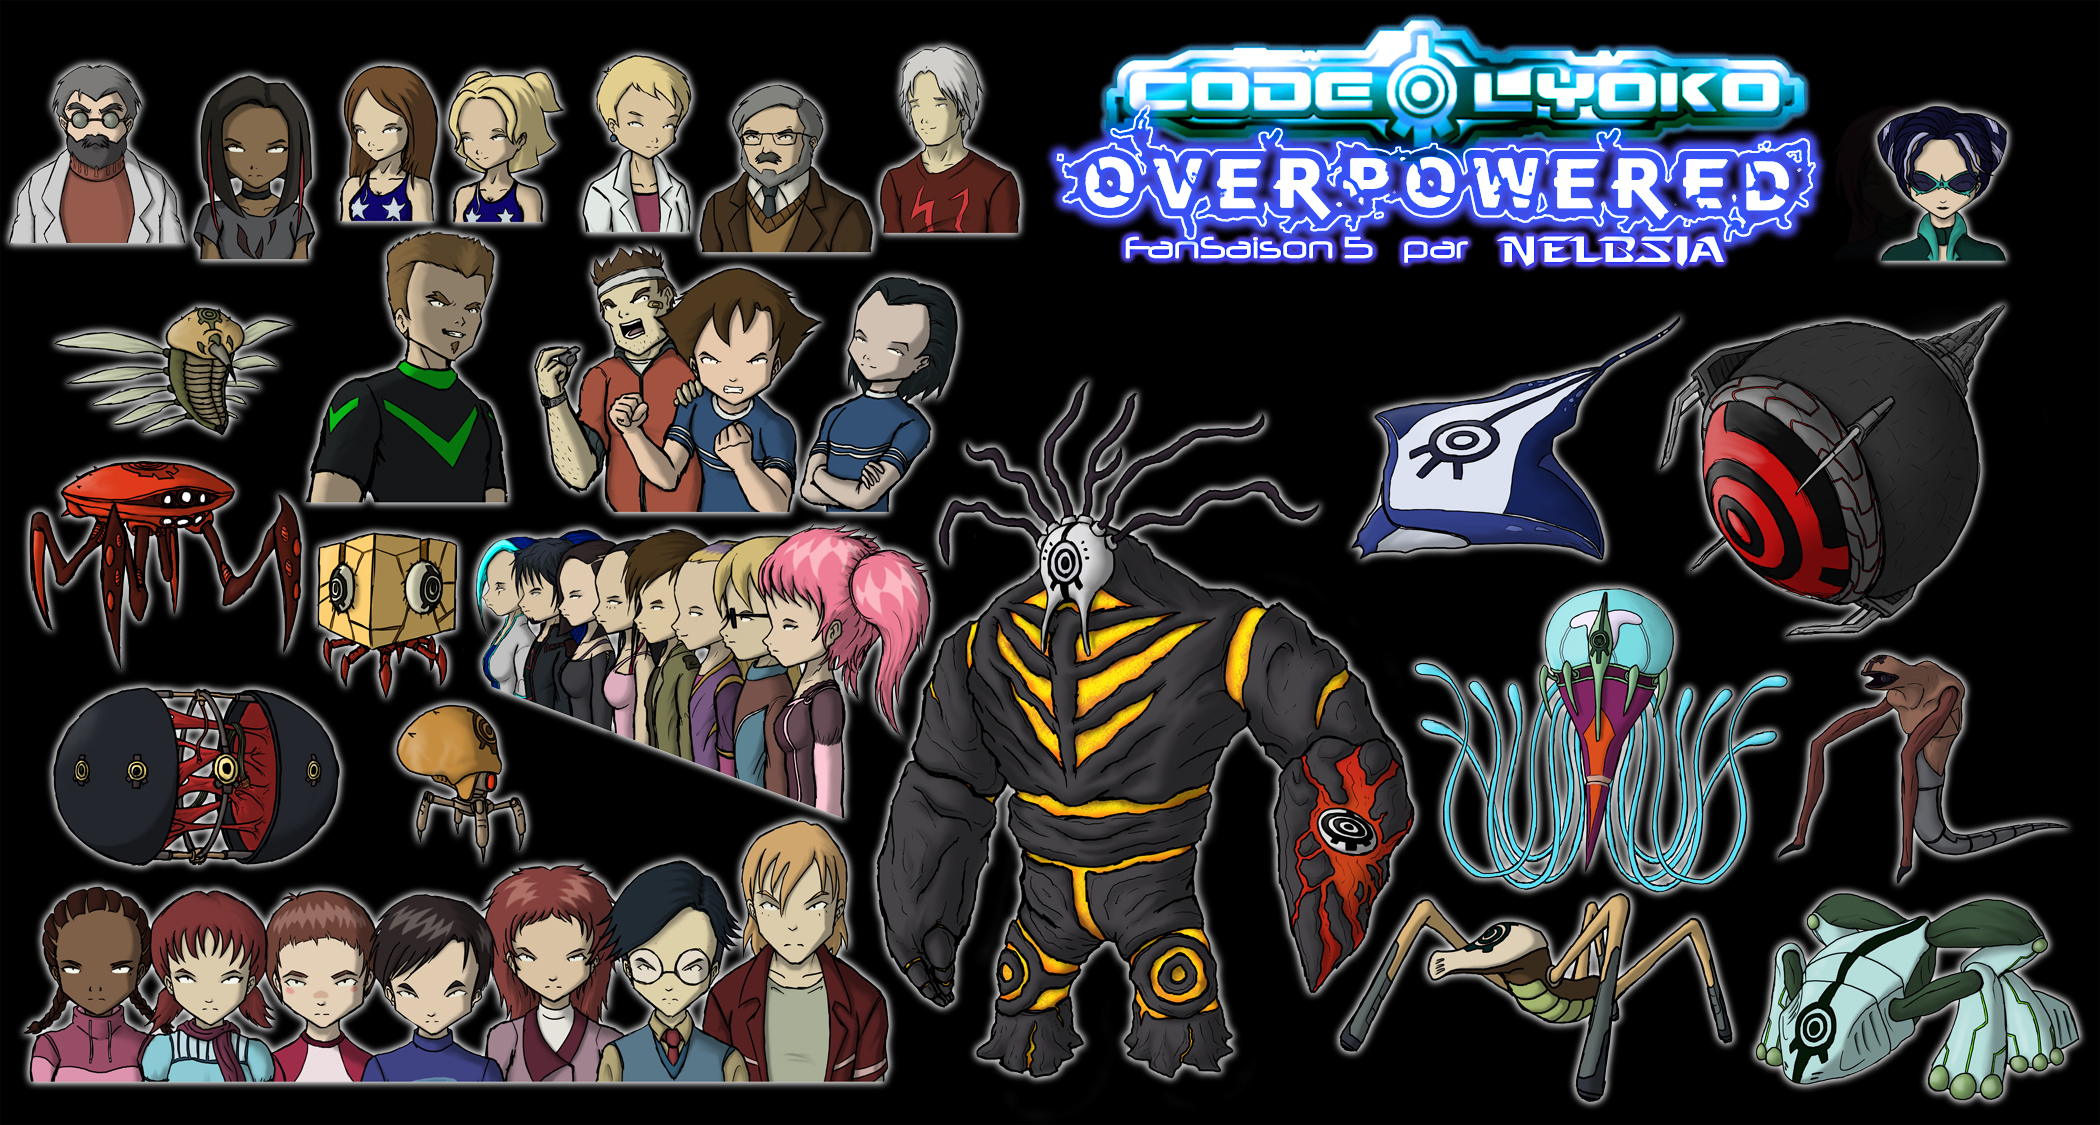 http://fc04.deviantart.net/fs71/f/2013/069/f/5/code_lyoko_overpowered_characters_and_monsters_by_nelbsia-d5xjfn2.jpg